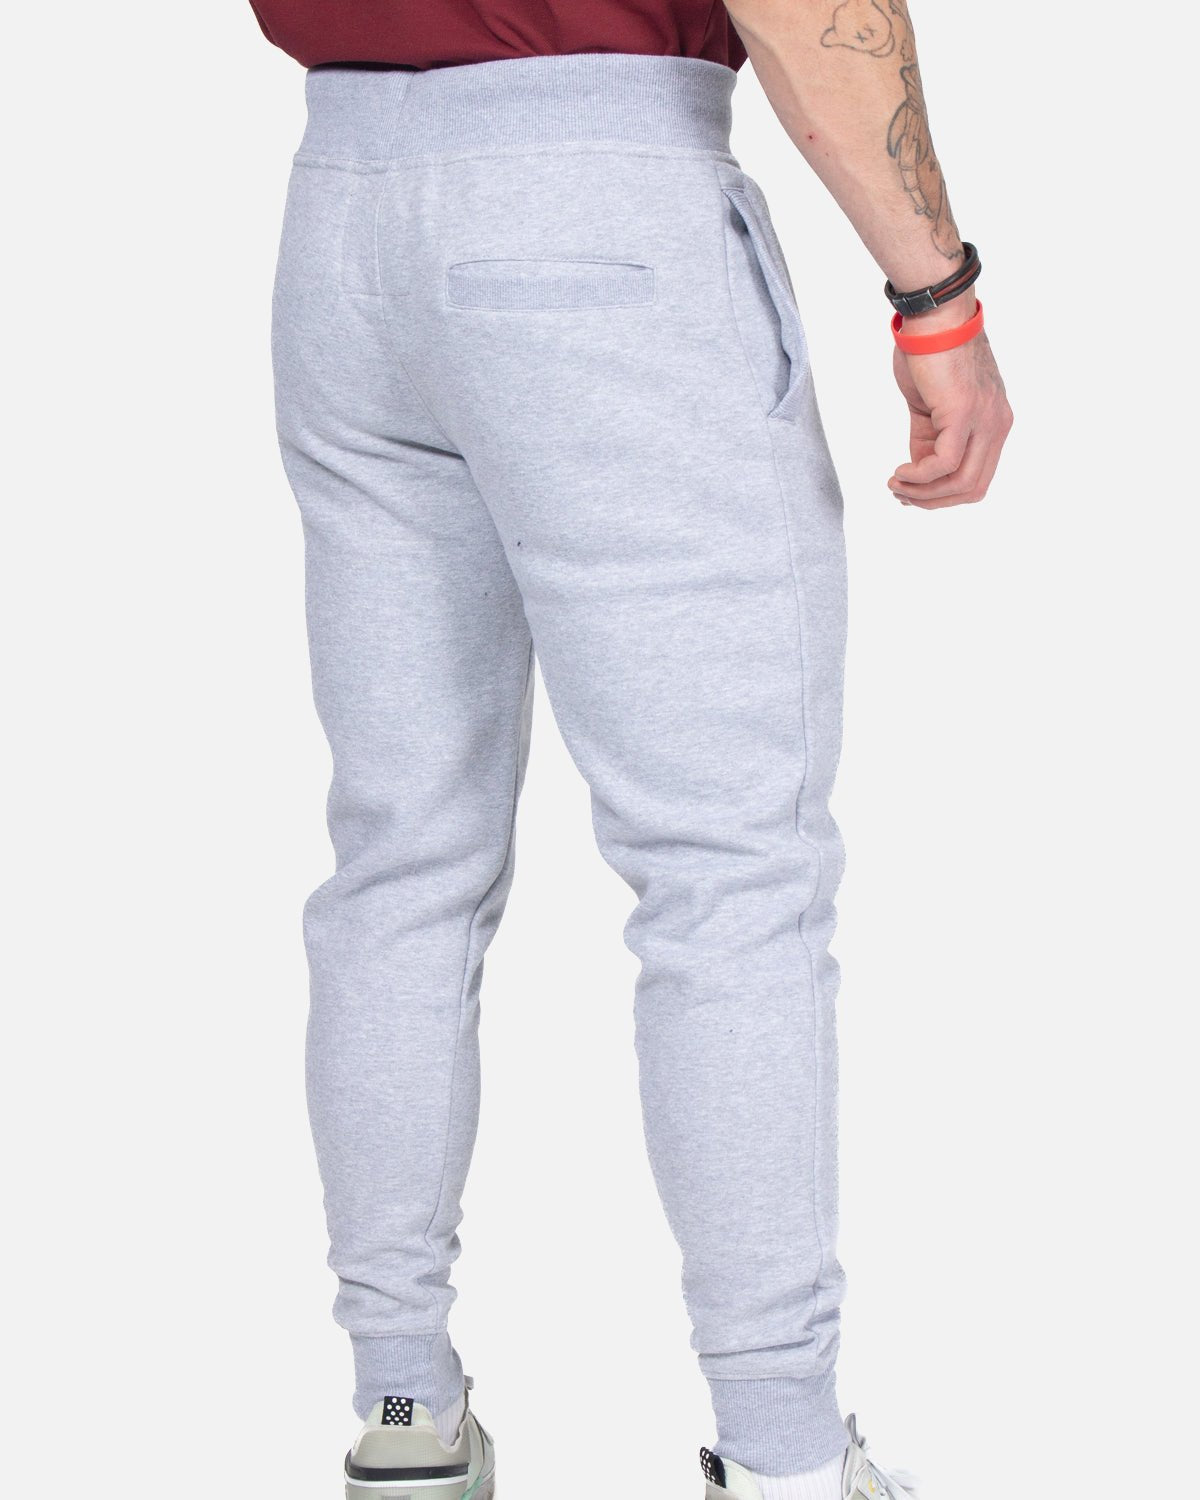 NFFC Adults Grey Marl Joggers - Nottingham Forest FC